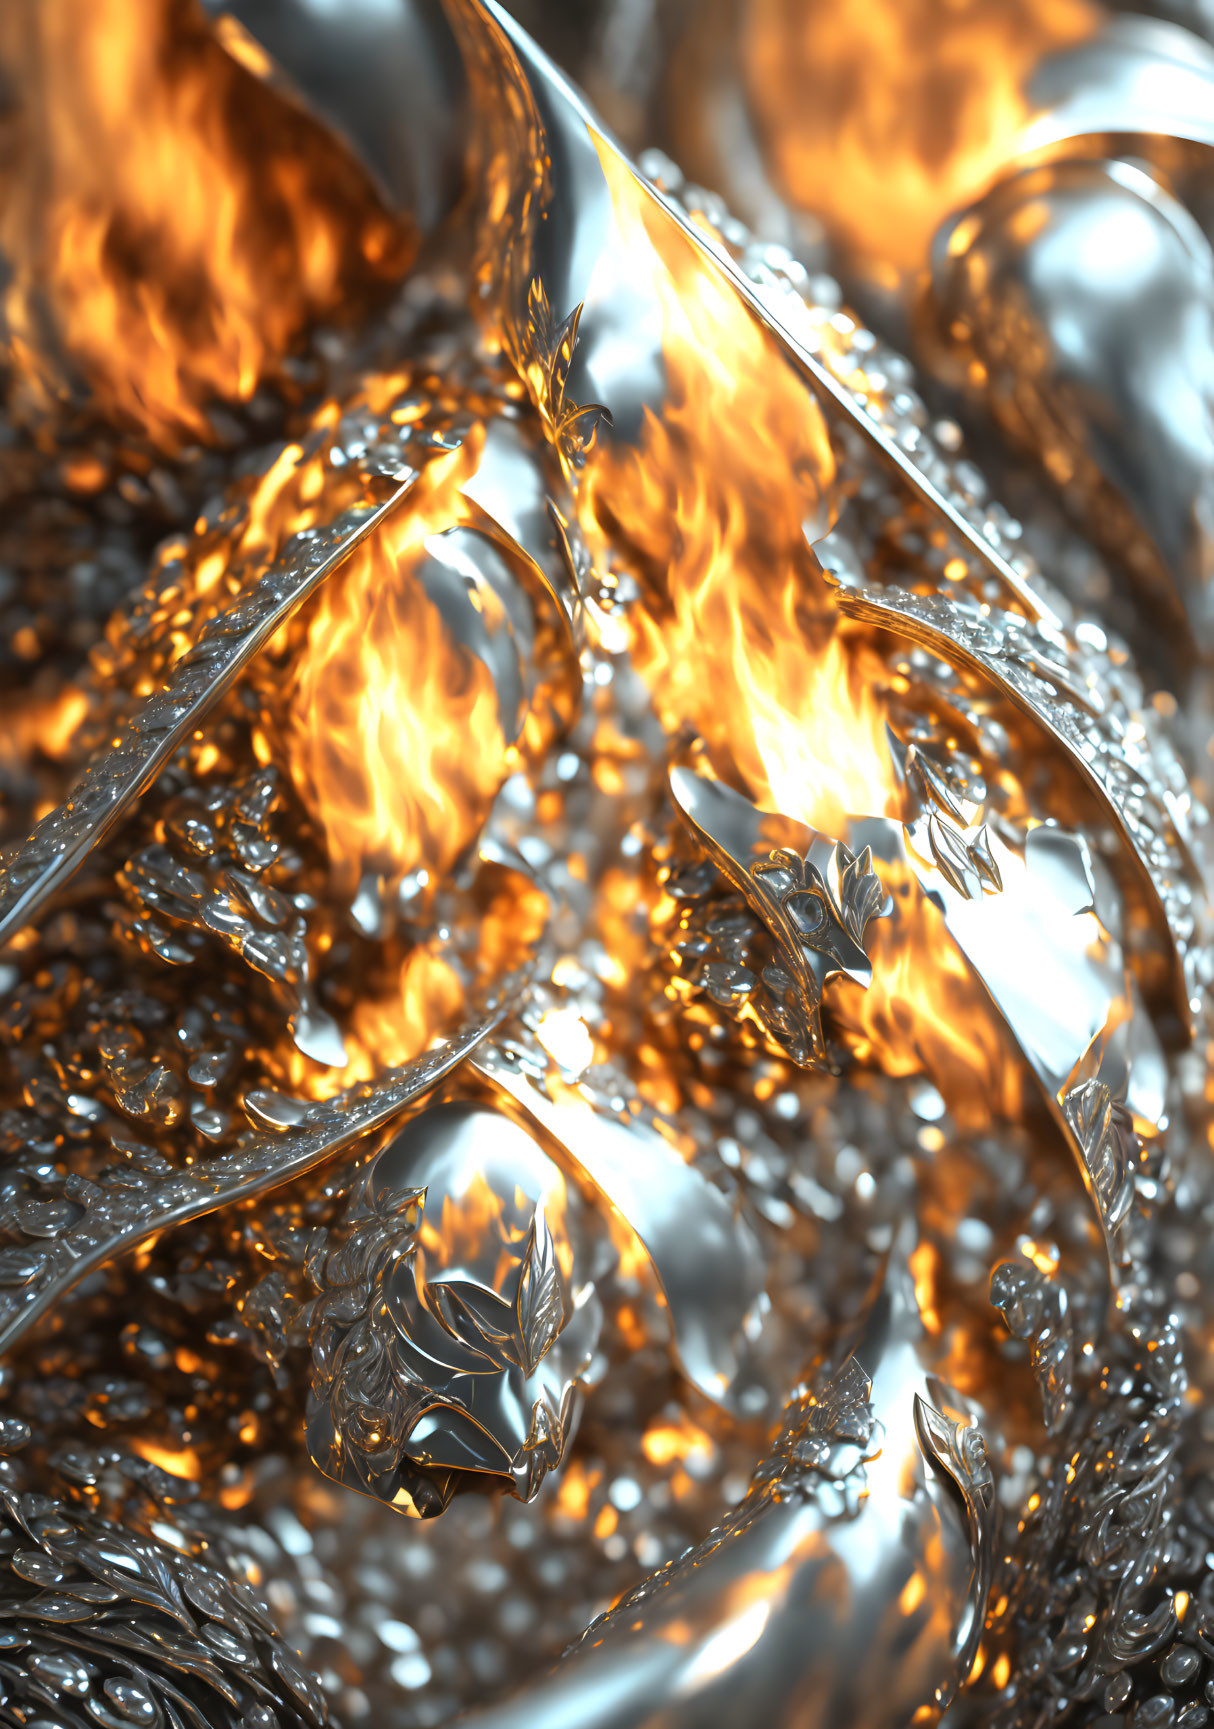 Shiny Metal Structure with Flame Design